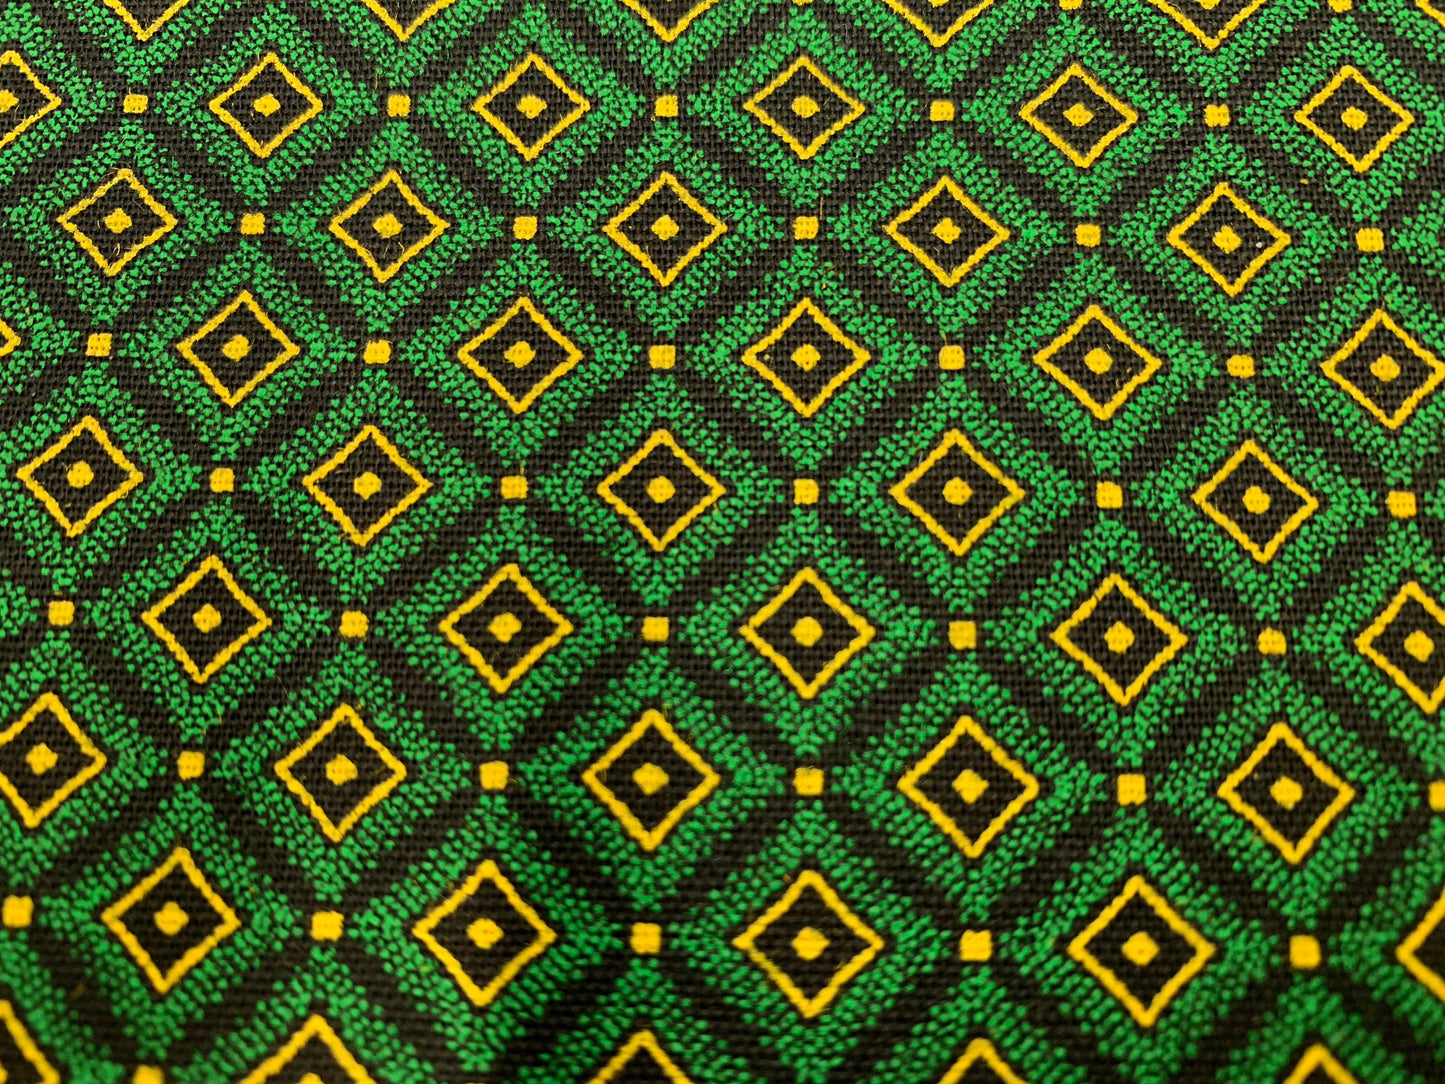 South African Shweshwe Fabric by the  YARD. DaGama 3 Cats Mosaic Green, Gold, Black. Cotton Fabric for Quilting, Apparel, Home Decor